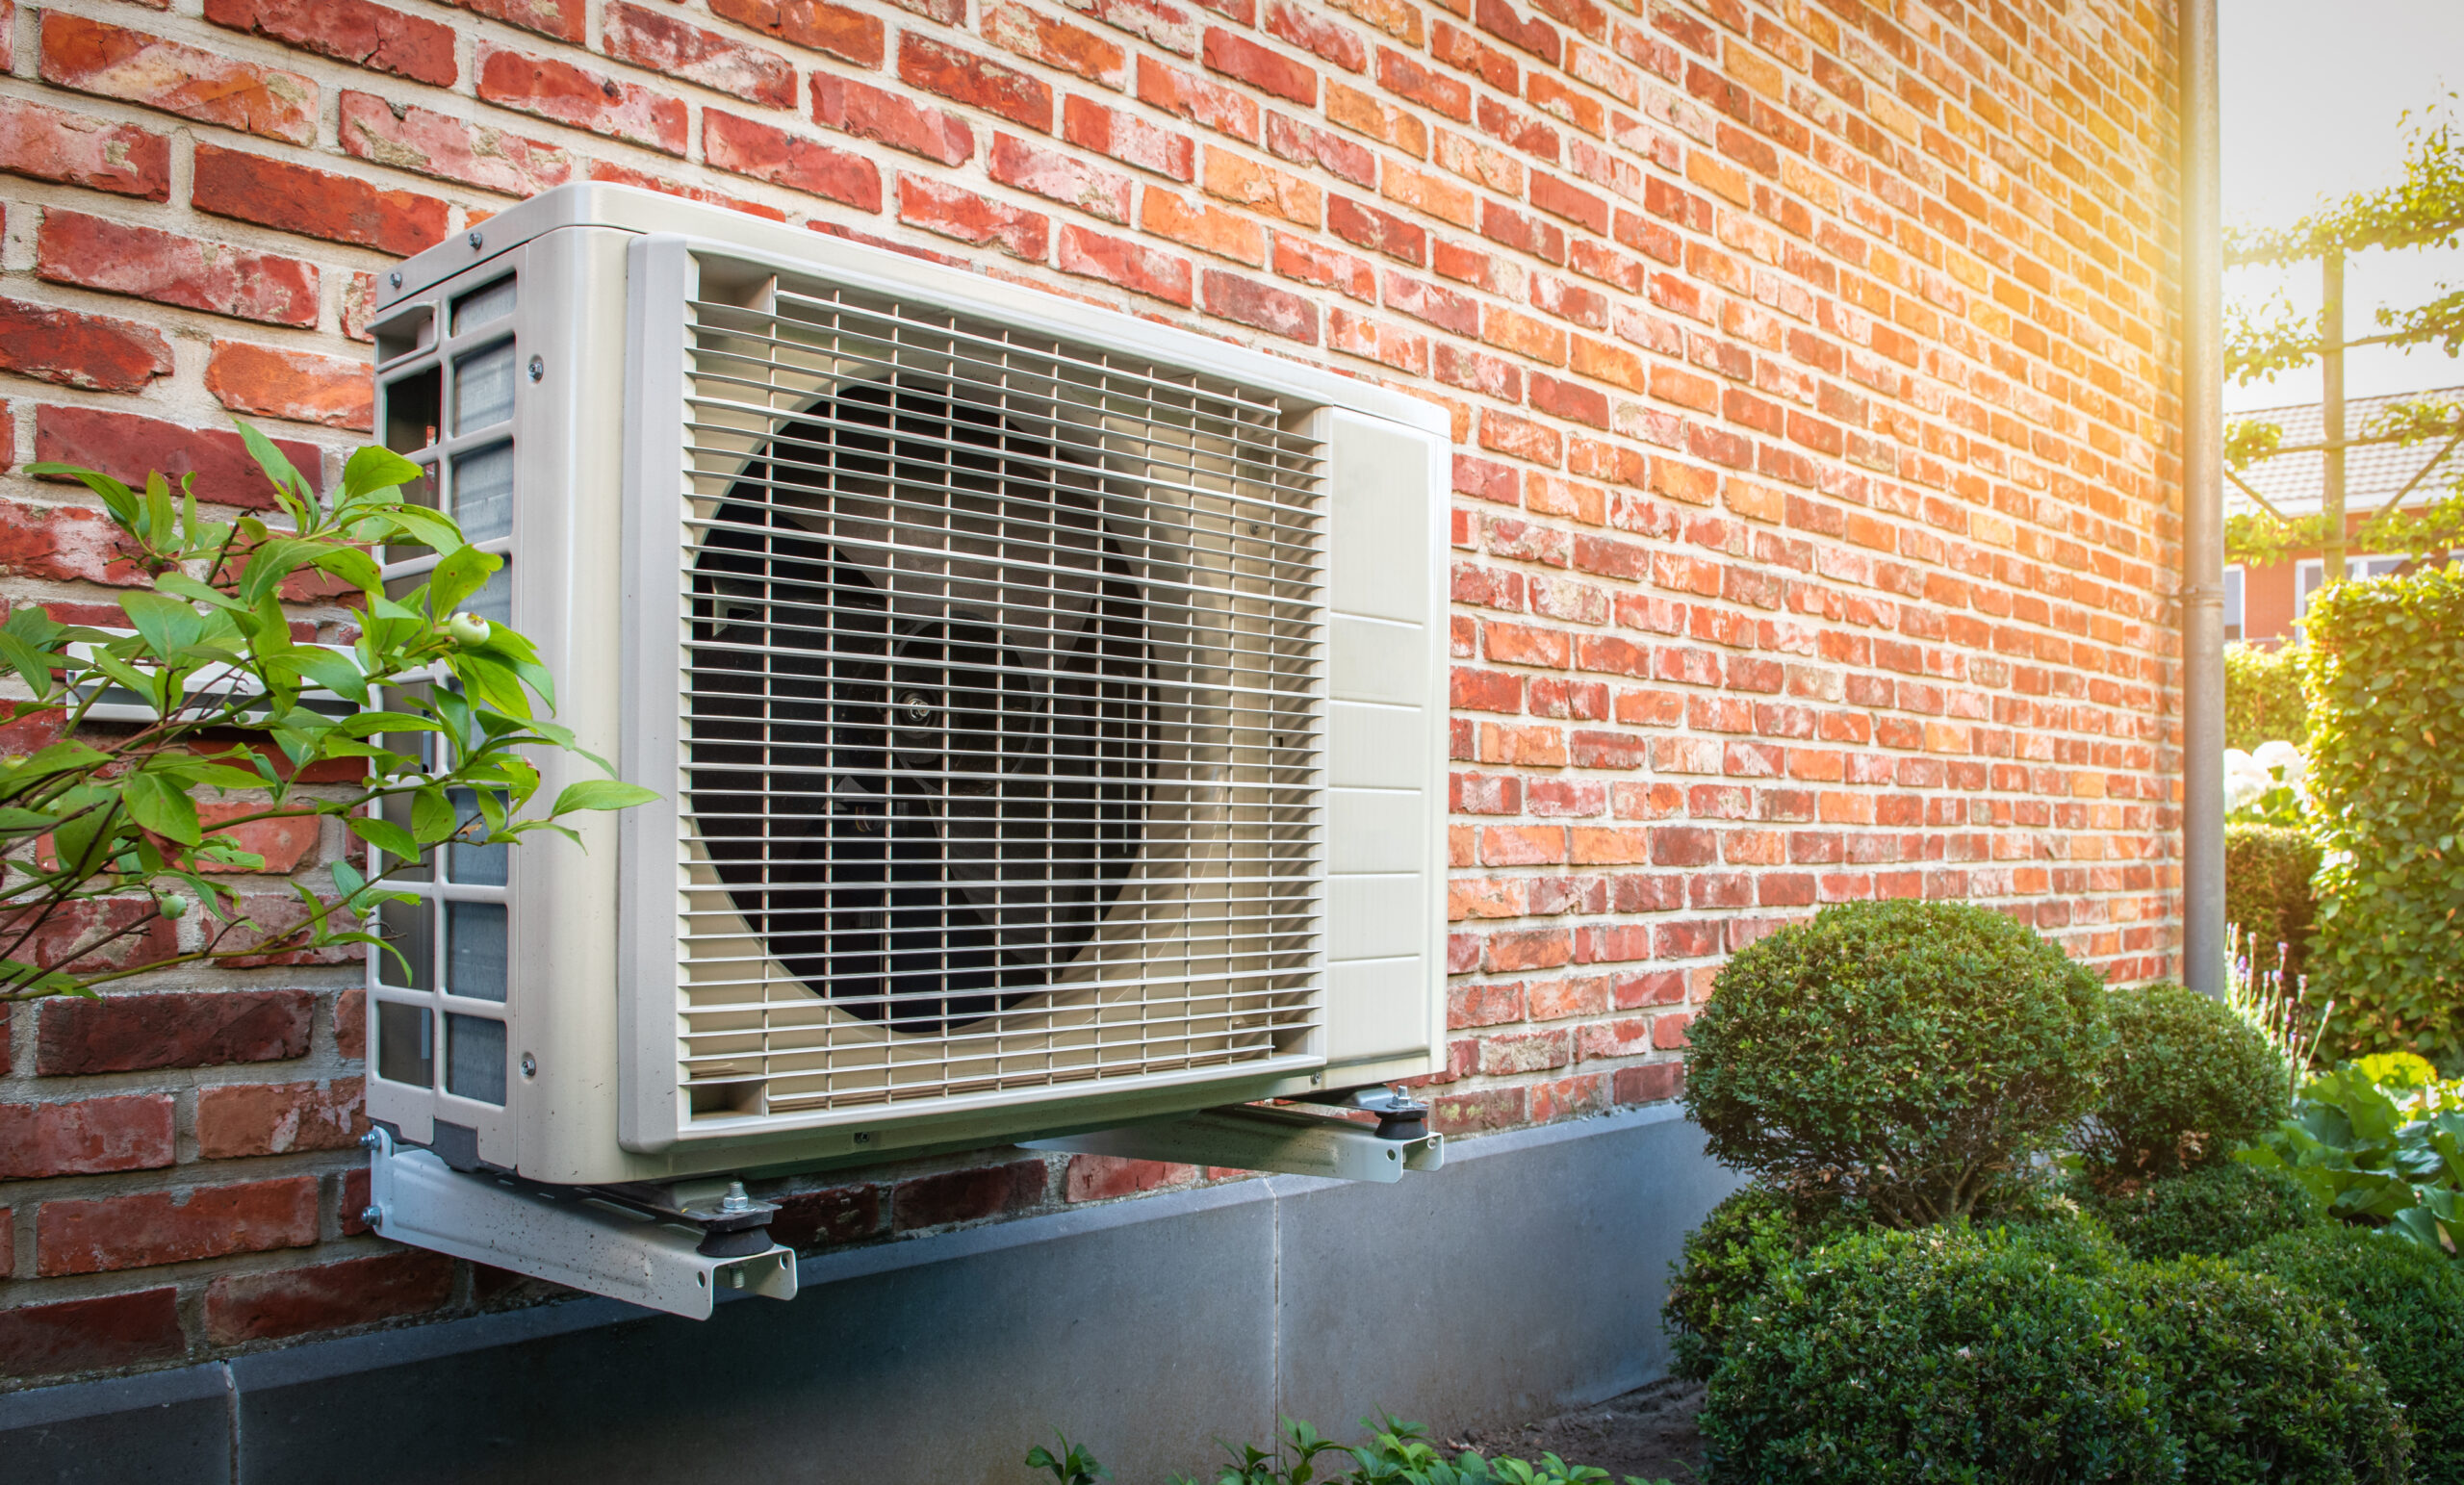 Heat pump mounted on the brick wall of Michigan home.